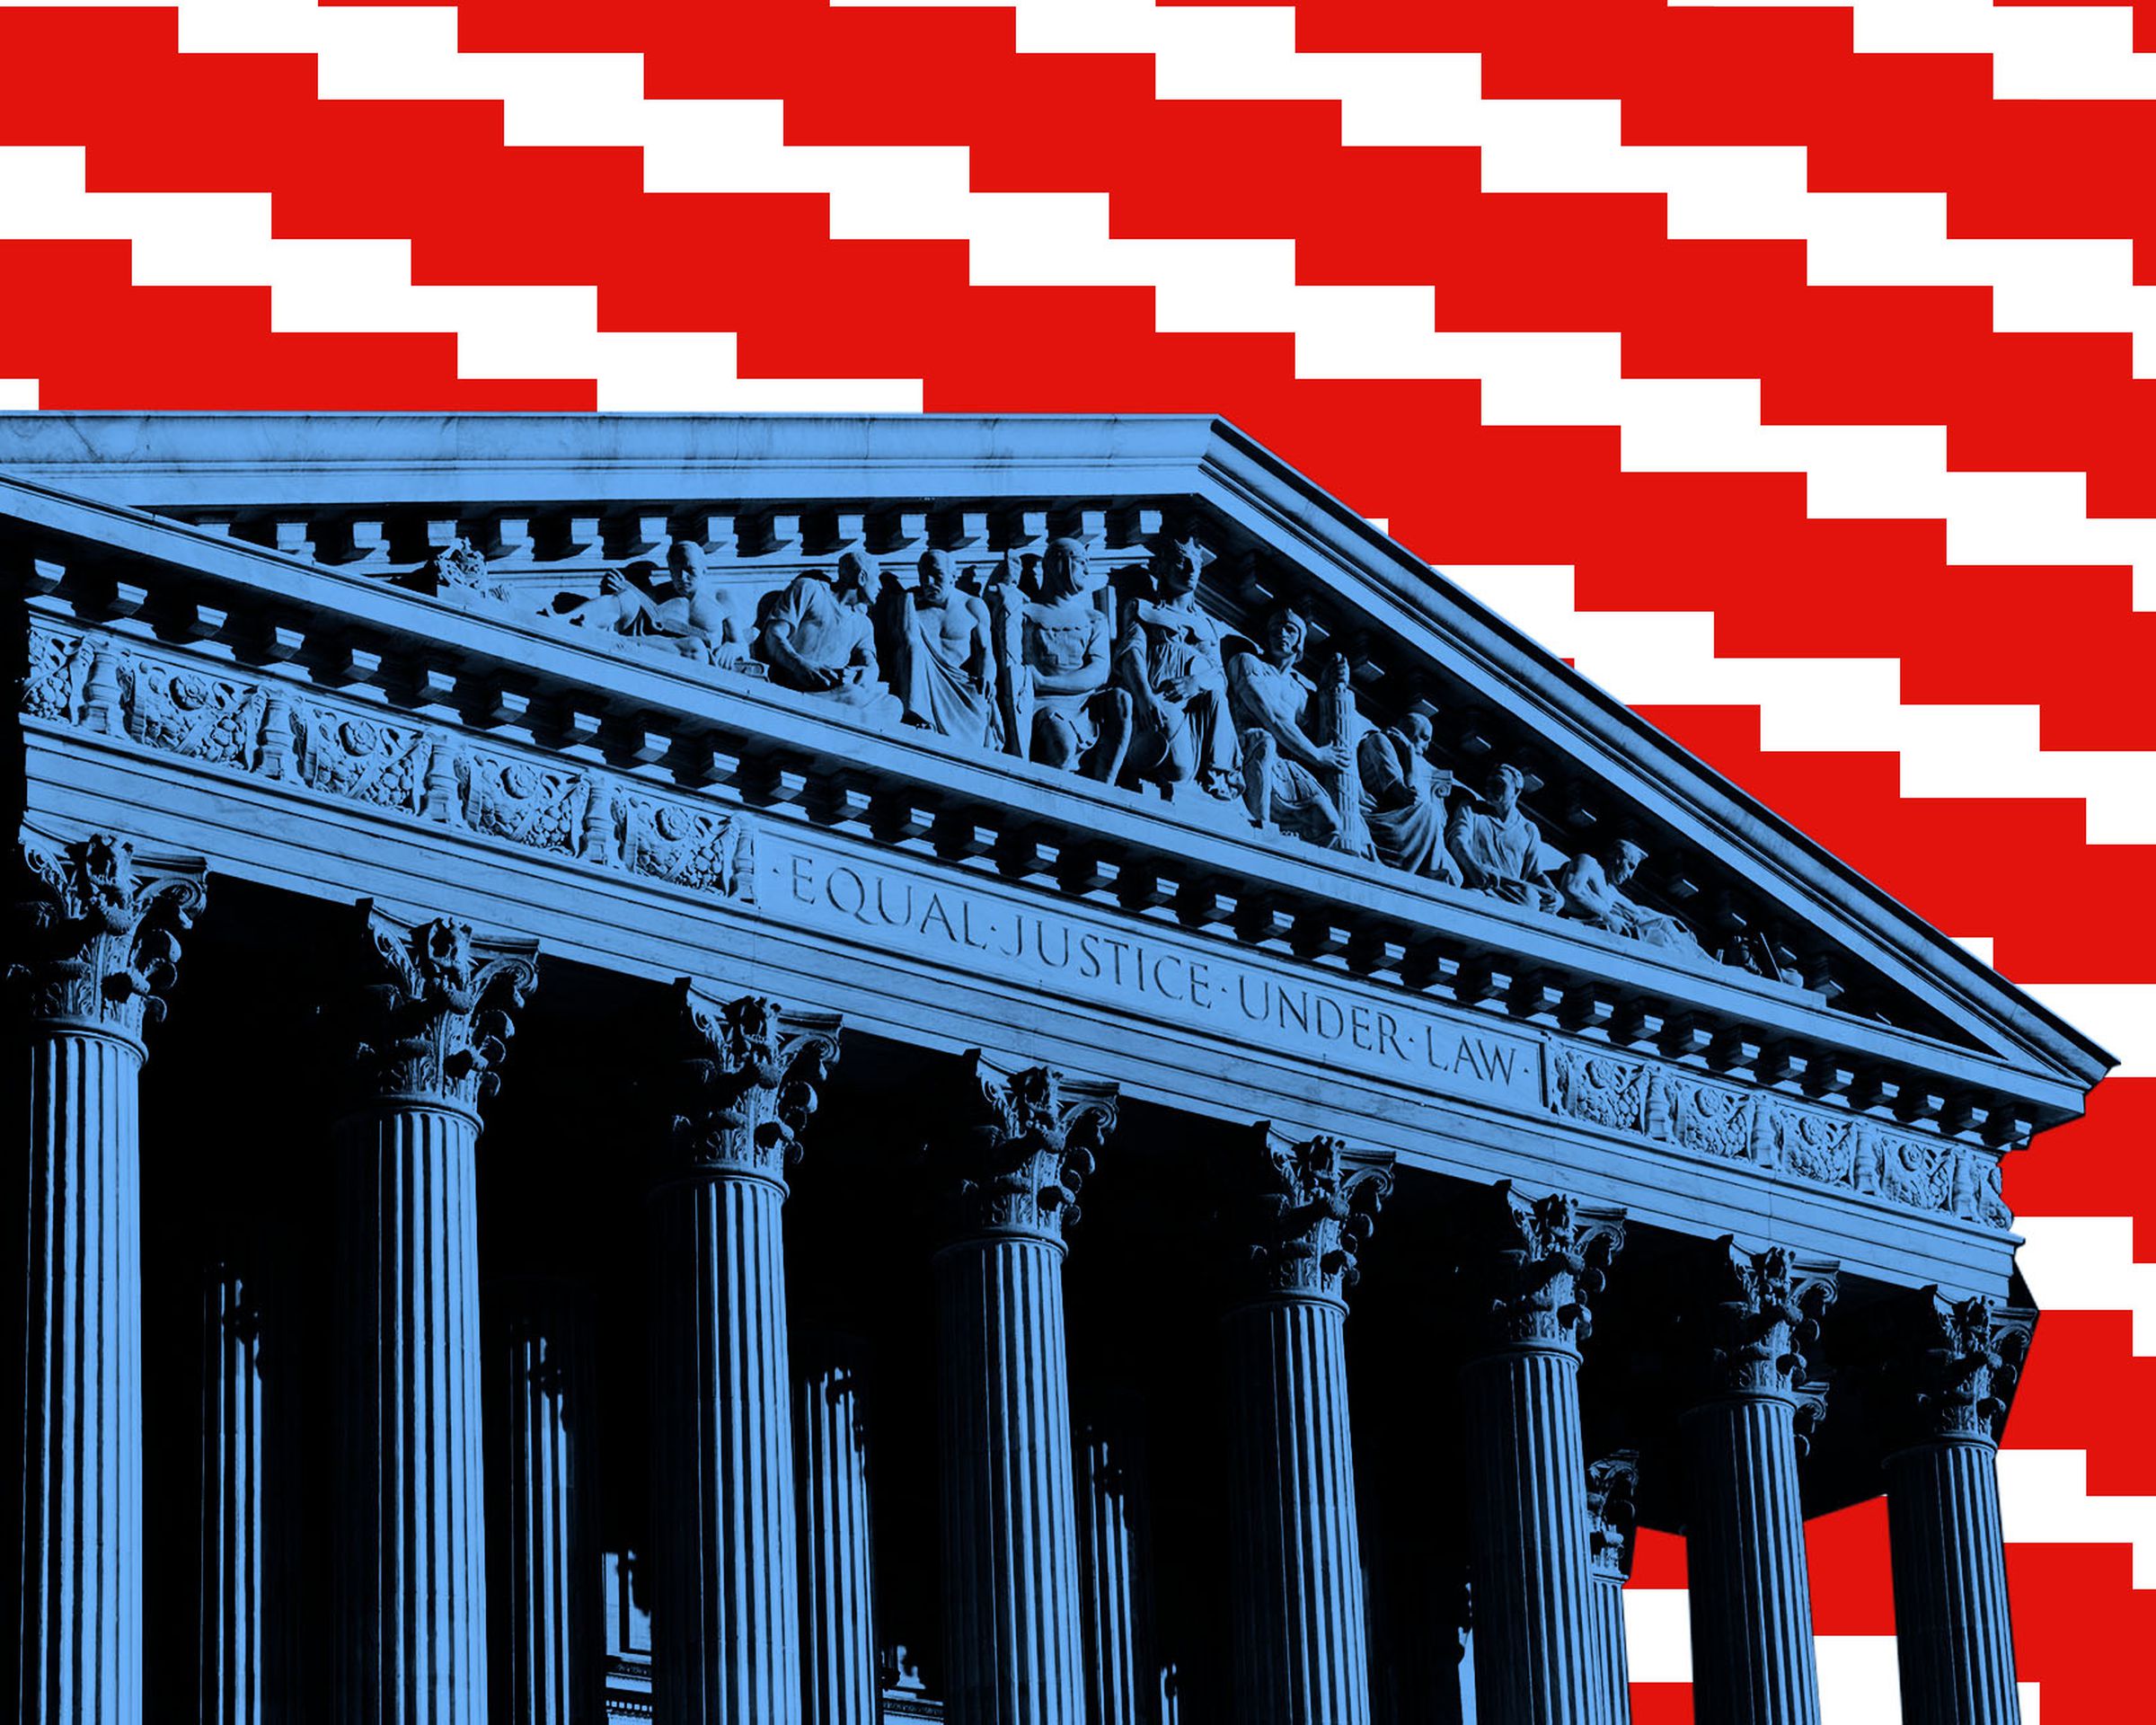 Photo illustration of the Supreme Court building with pixelated red and white stripes.